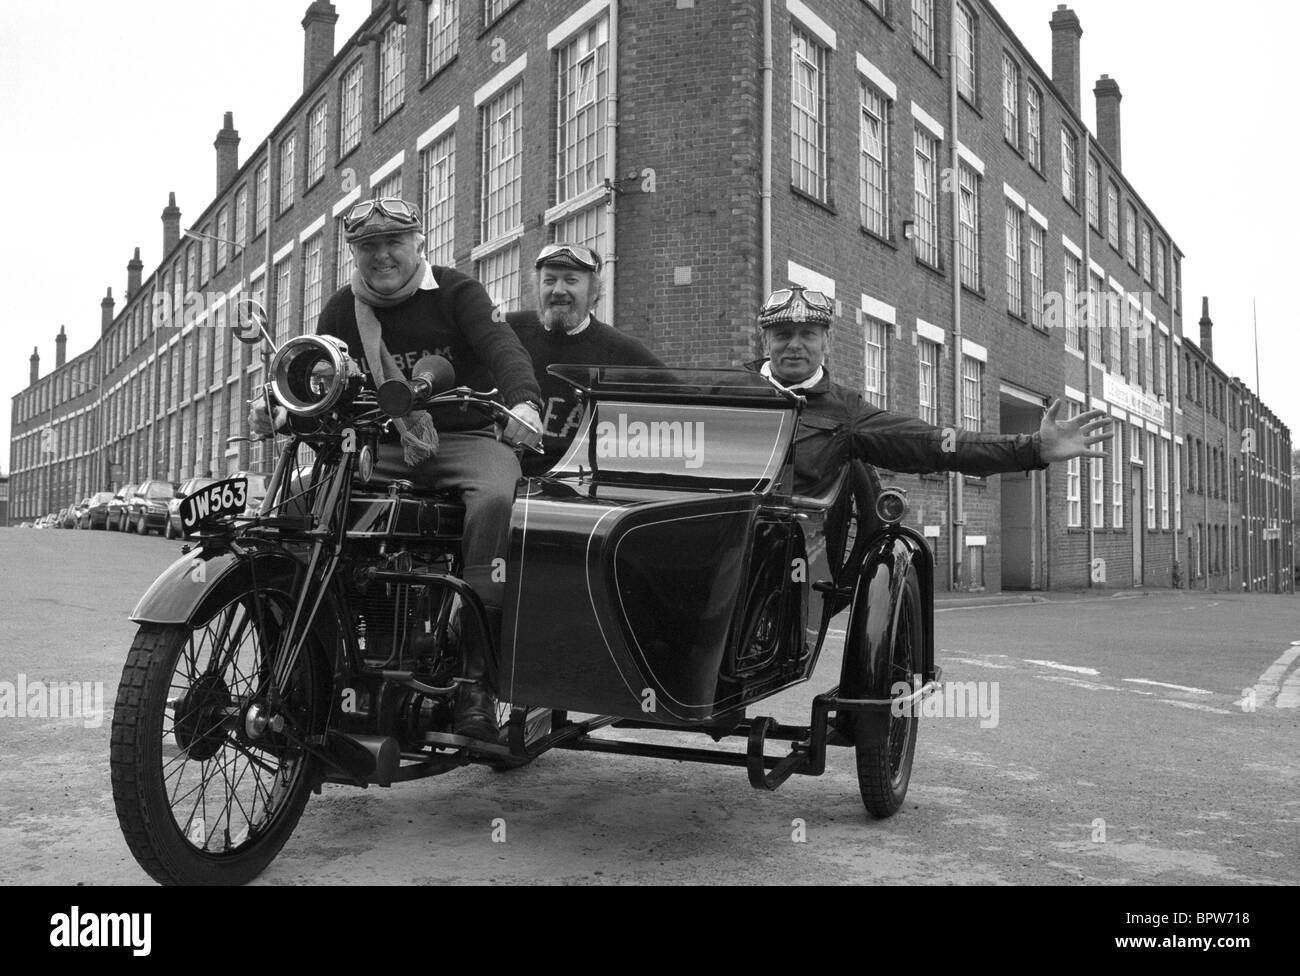 Sunbeam motorcycle enthusiasts riding a Sunbeam motorcycle and sidecar in past the former Sunbeam factory in Wolverhampton Stock Photo